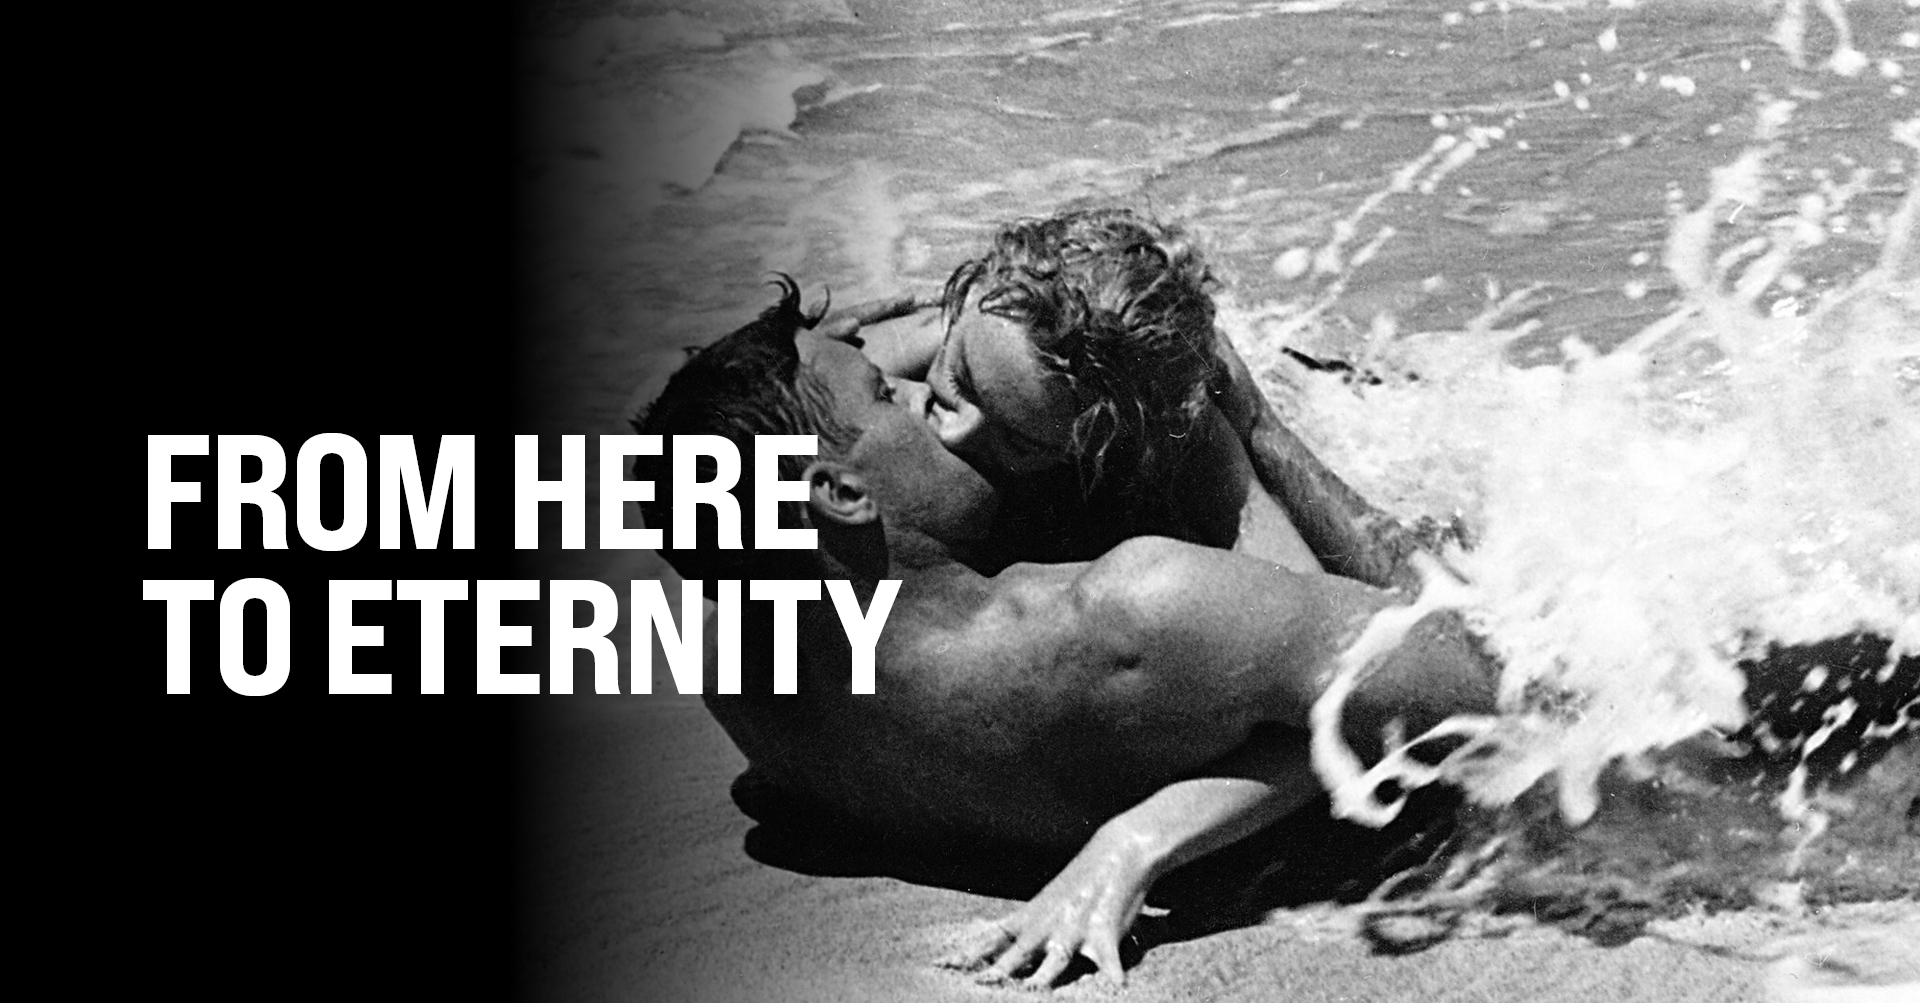 44-facts-about-the-movie-from-here-to-eternity